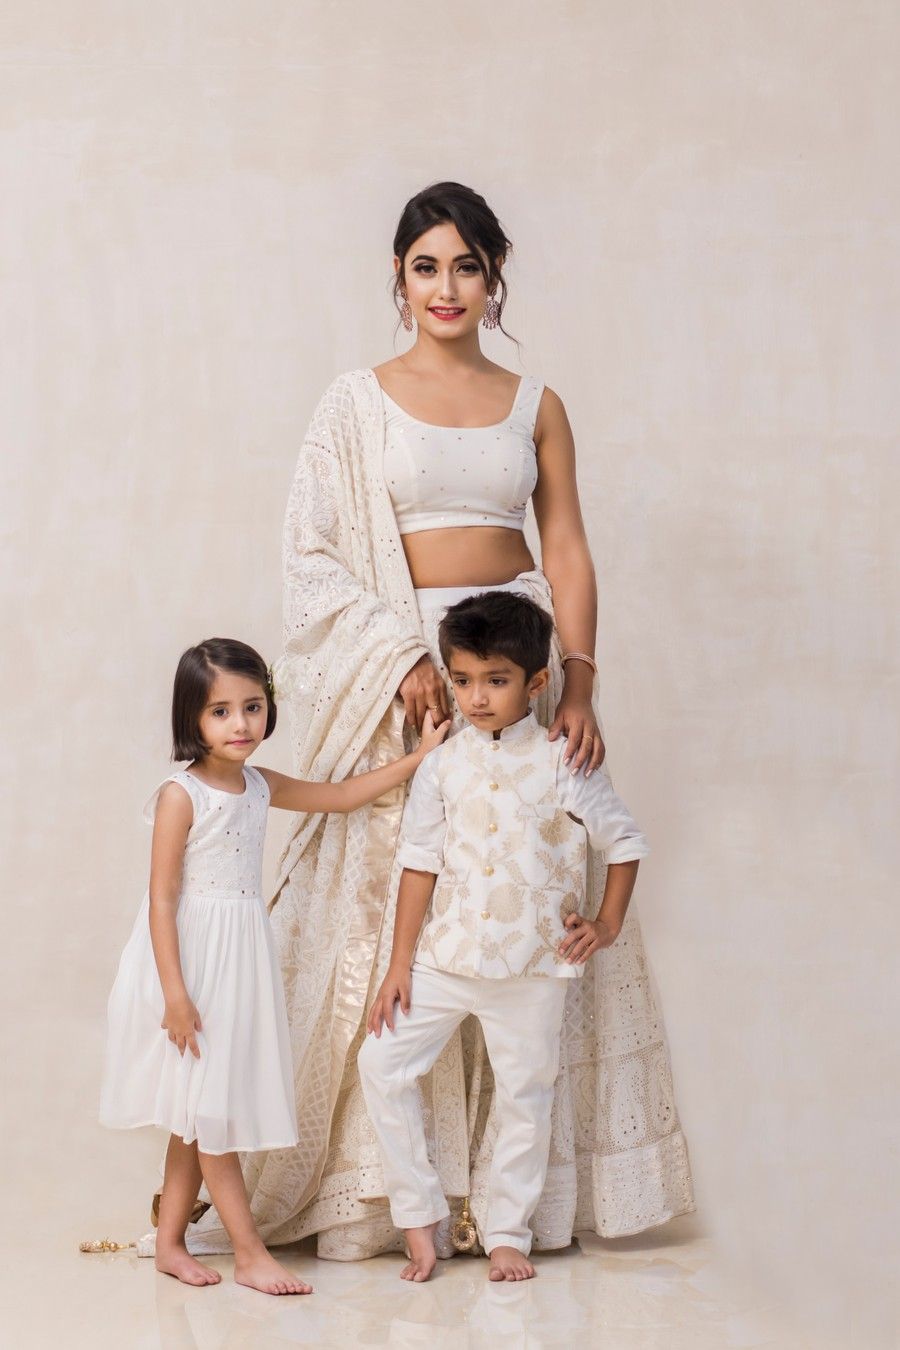 family dress combo Images • KP Fashion (@693886914) on ShareChat